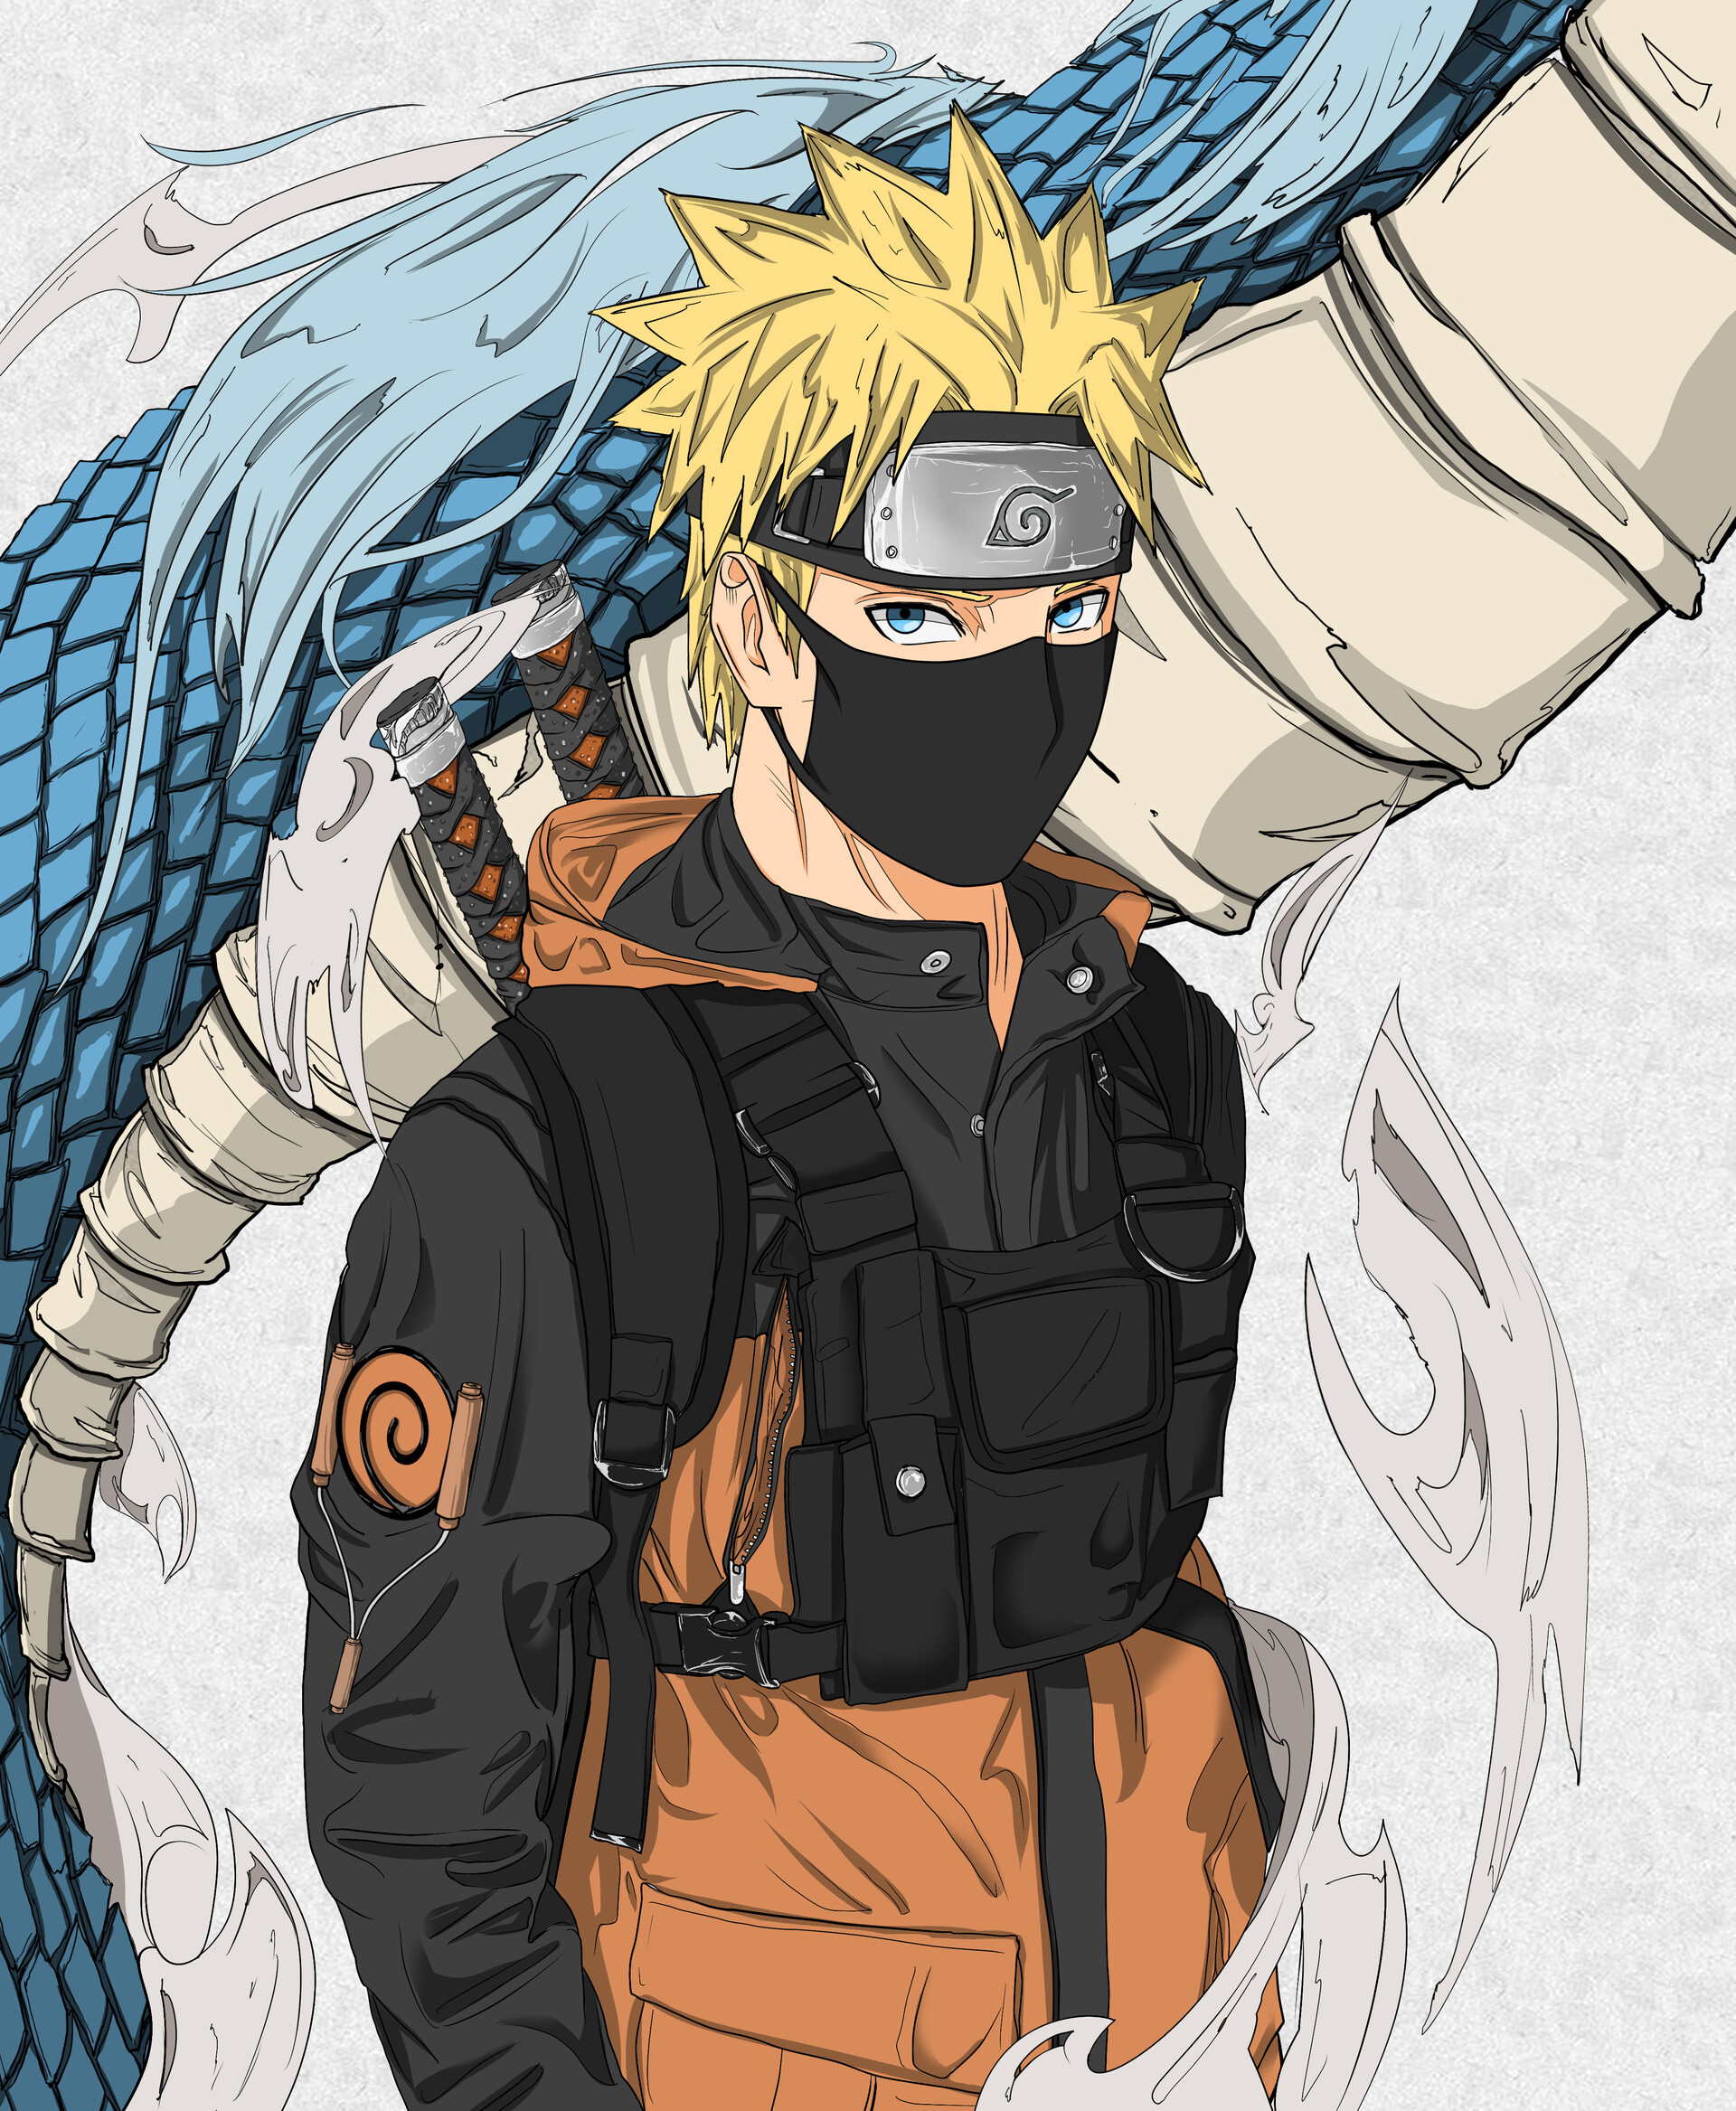 15 Aesthetic Naruto HD Wallpapers for iPhoneFree Download